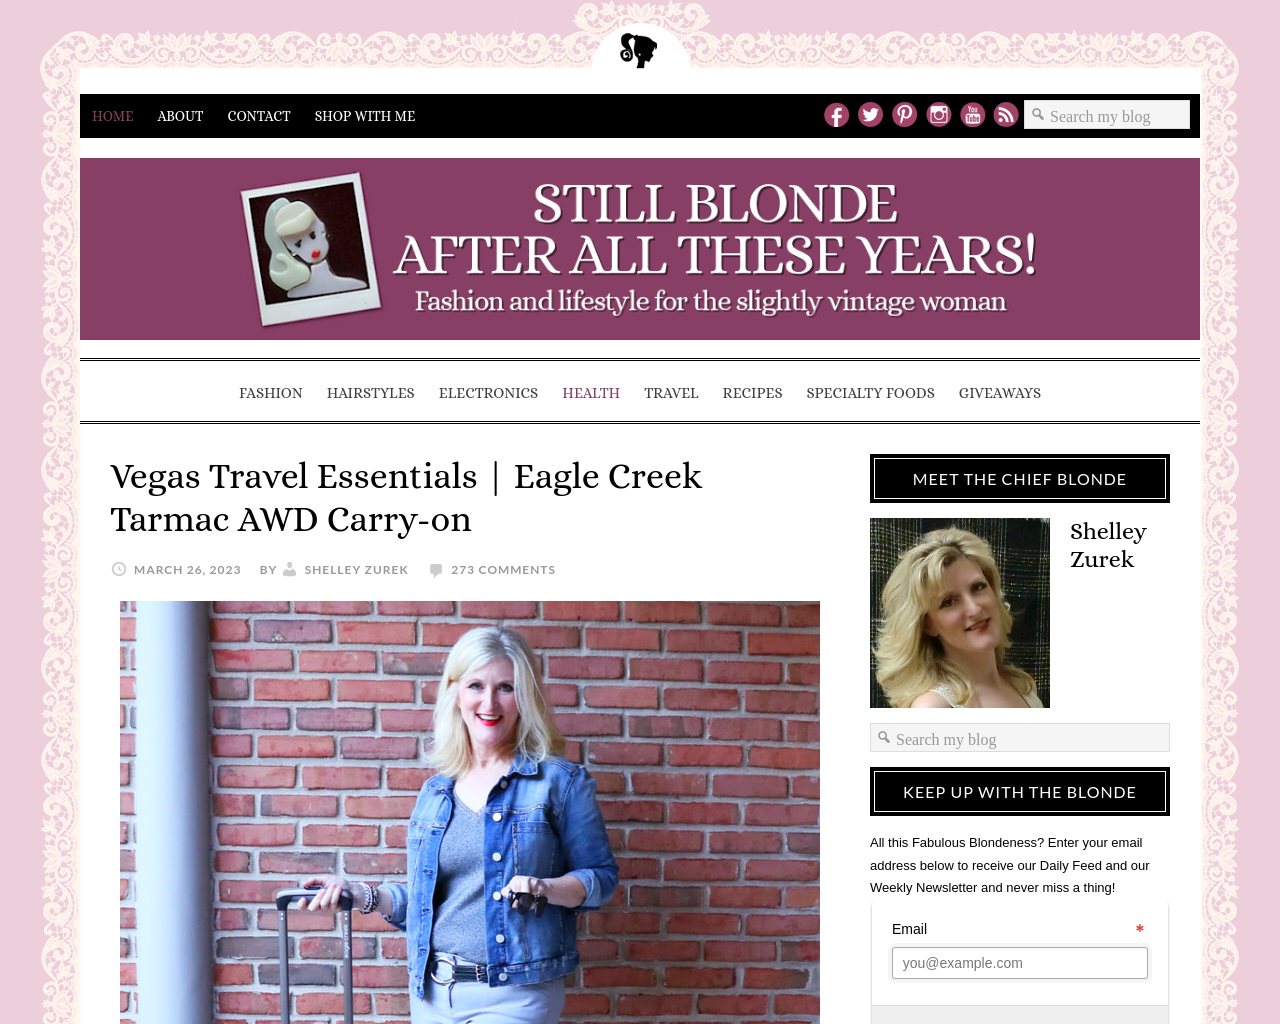 stillblondeafteralltheseyears.com